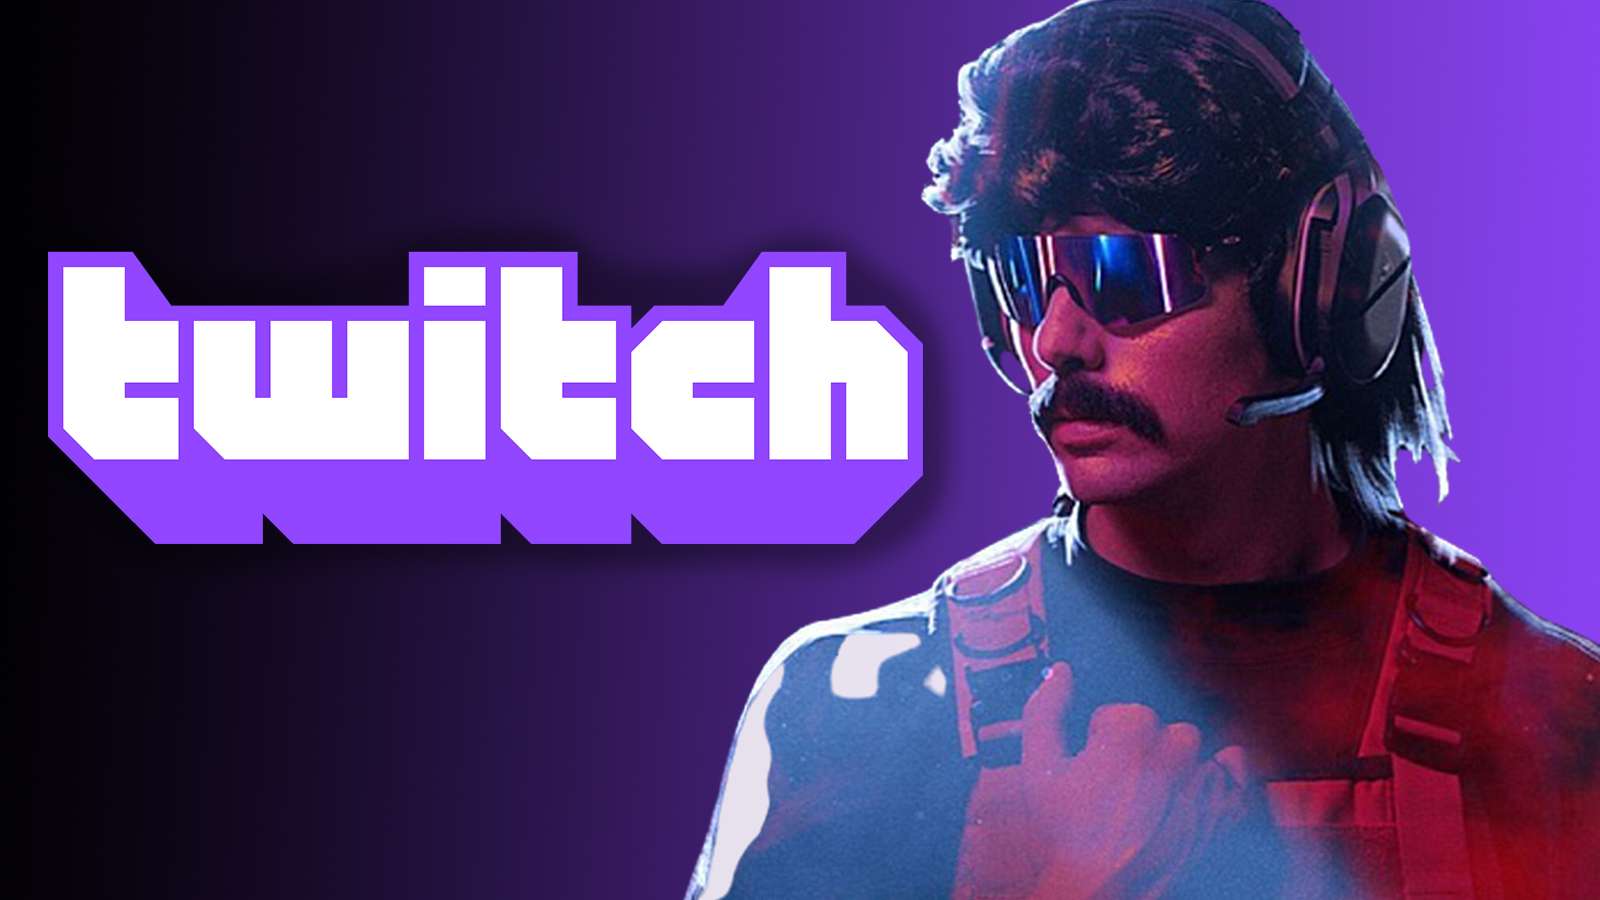 Twitch Brand Safety Score may reveal Dr Disrespect ban reason